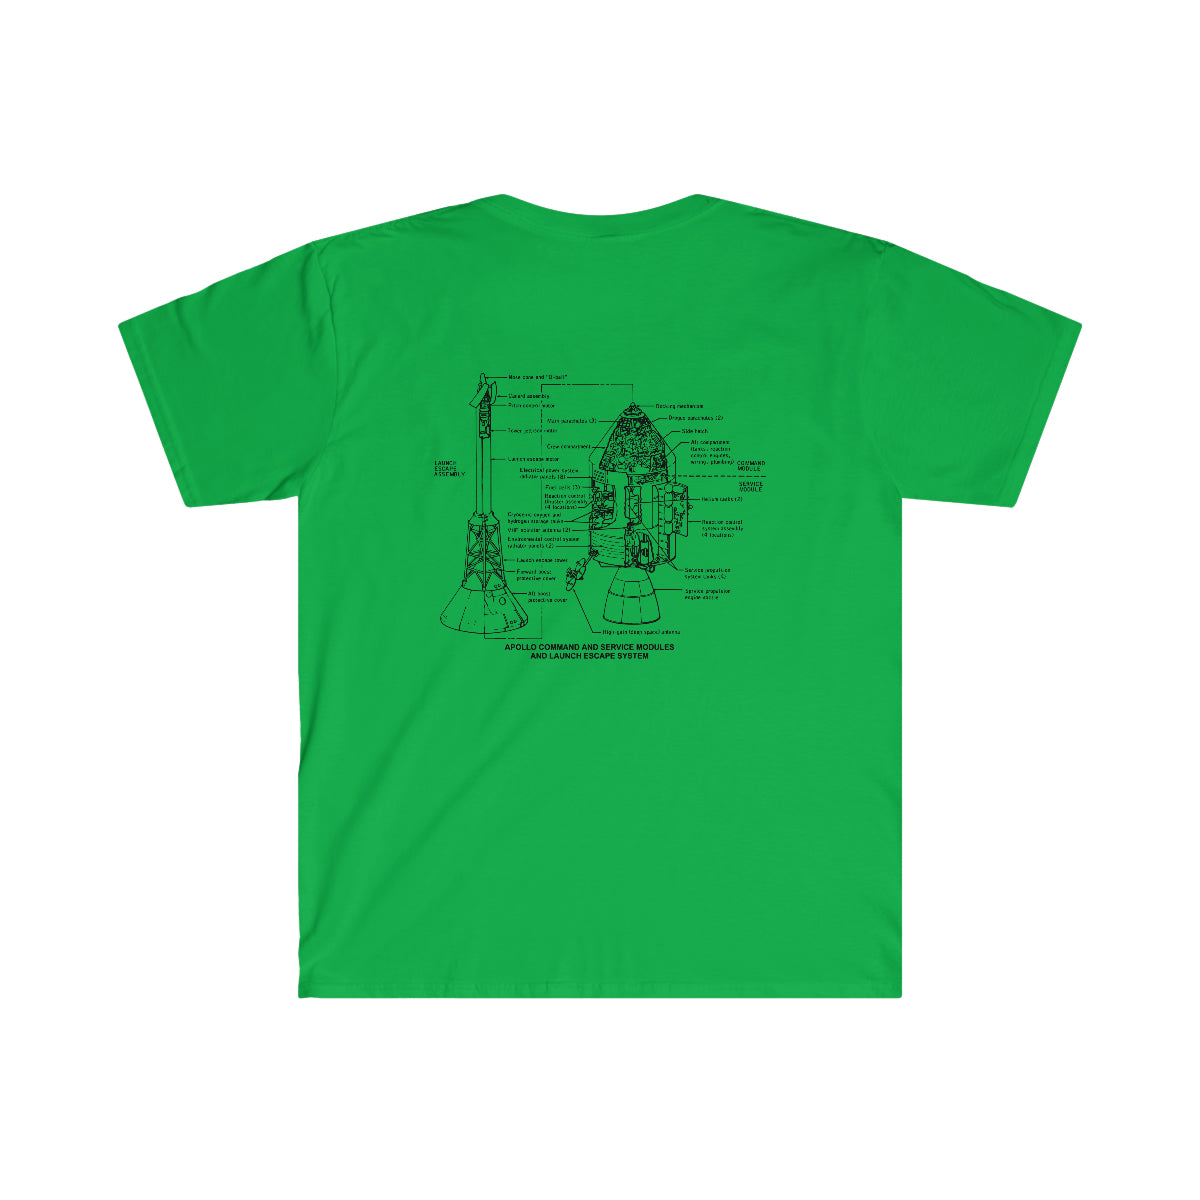 A historic Apollo Command & Service Module T-Shirt with a drawing on it inspired by the Apollo space program.